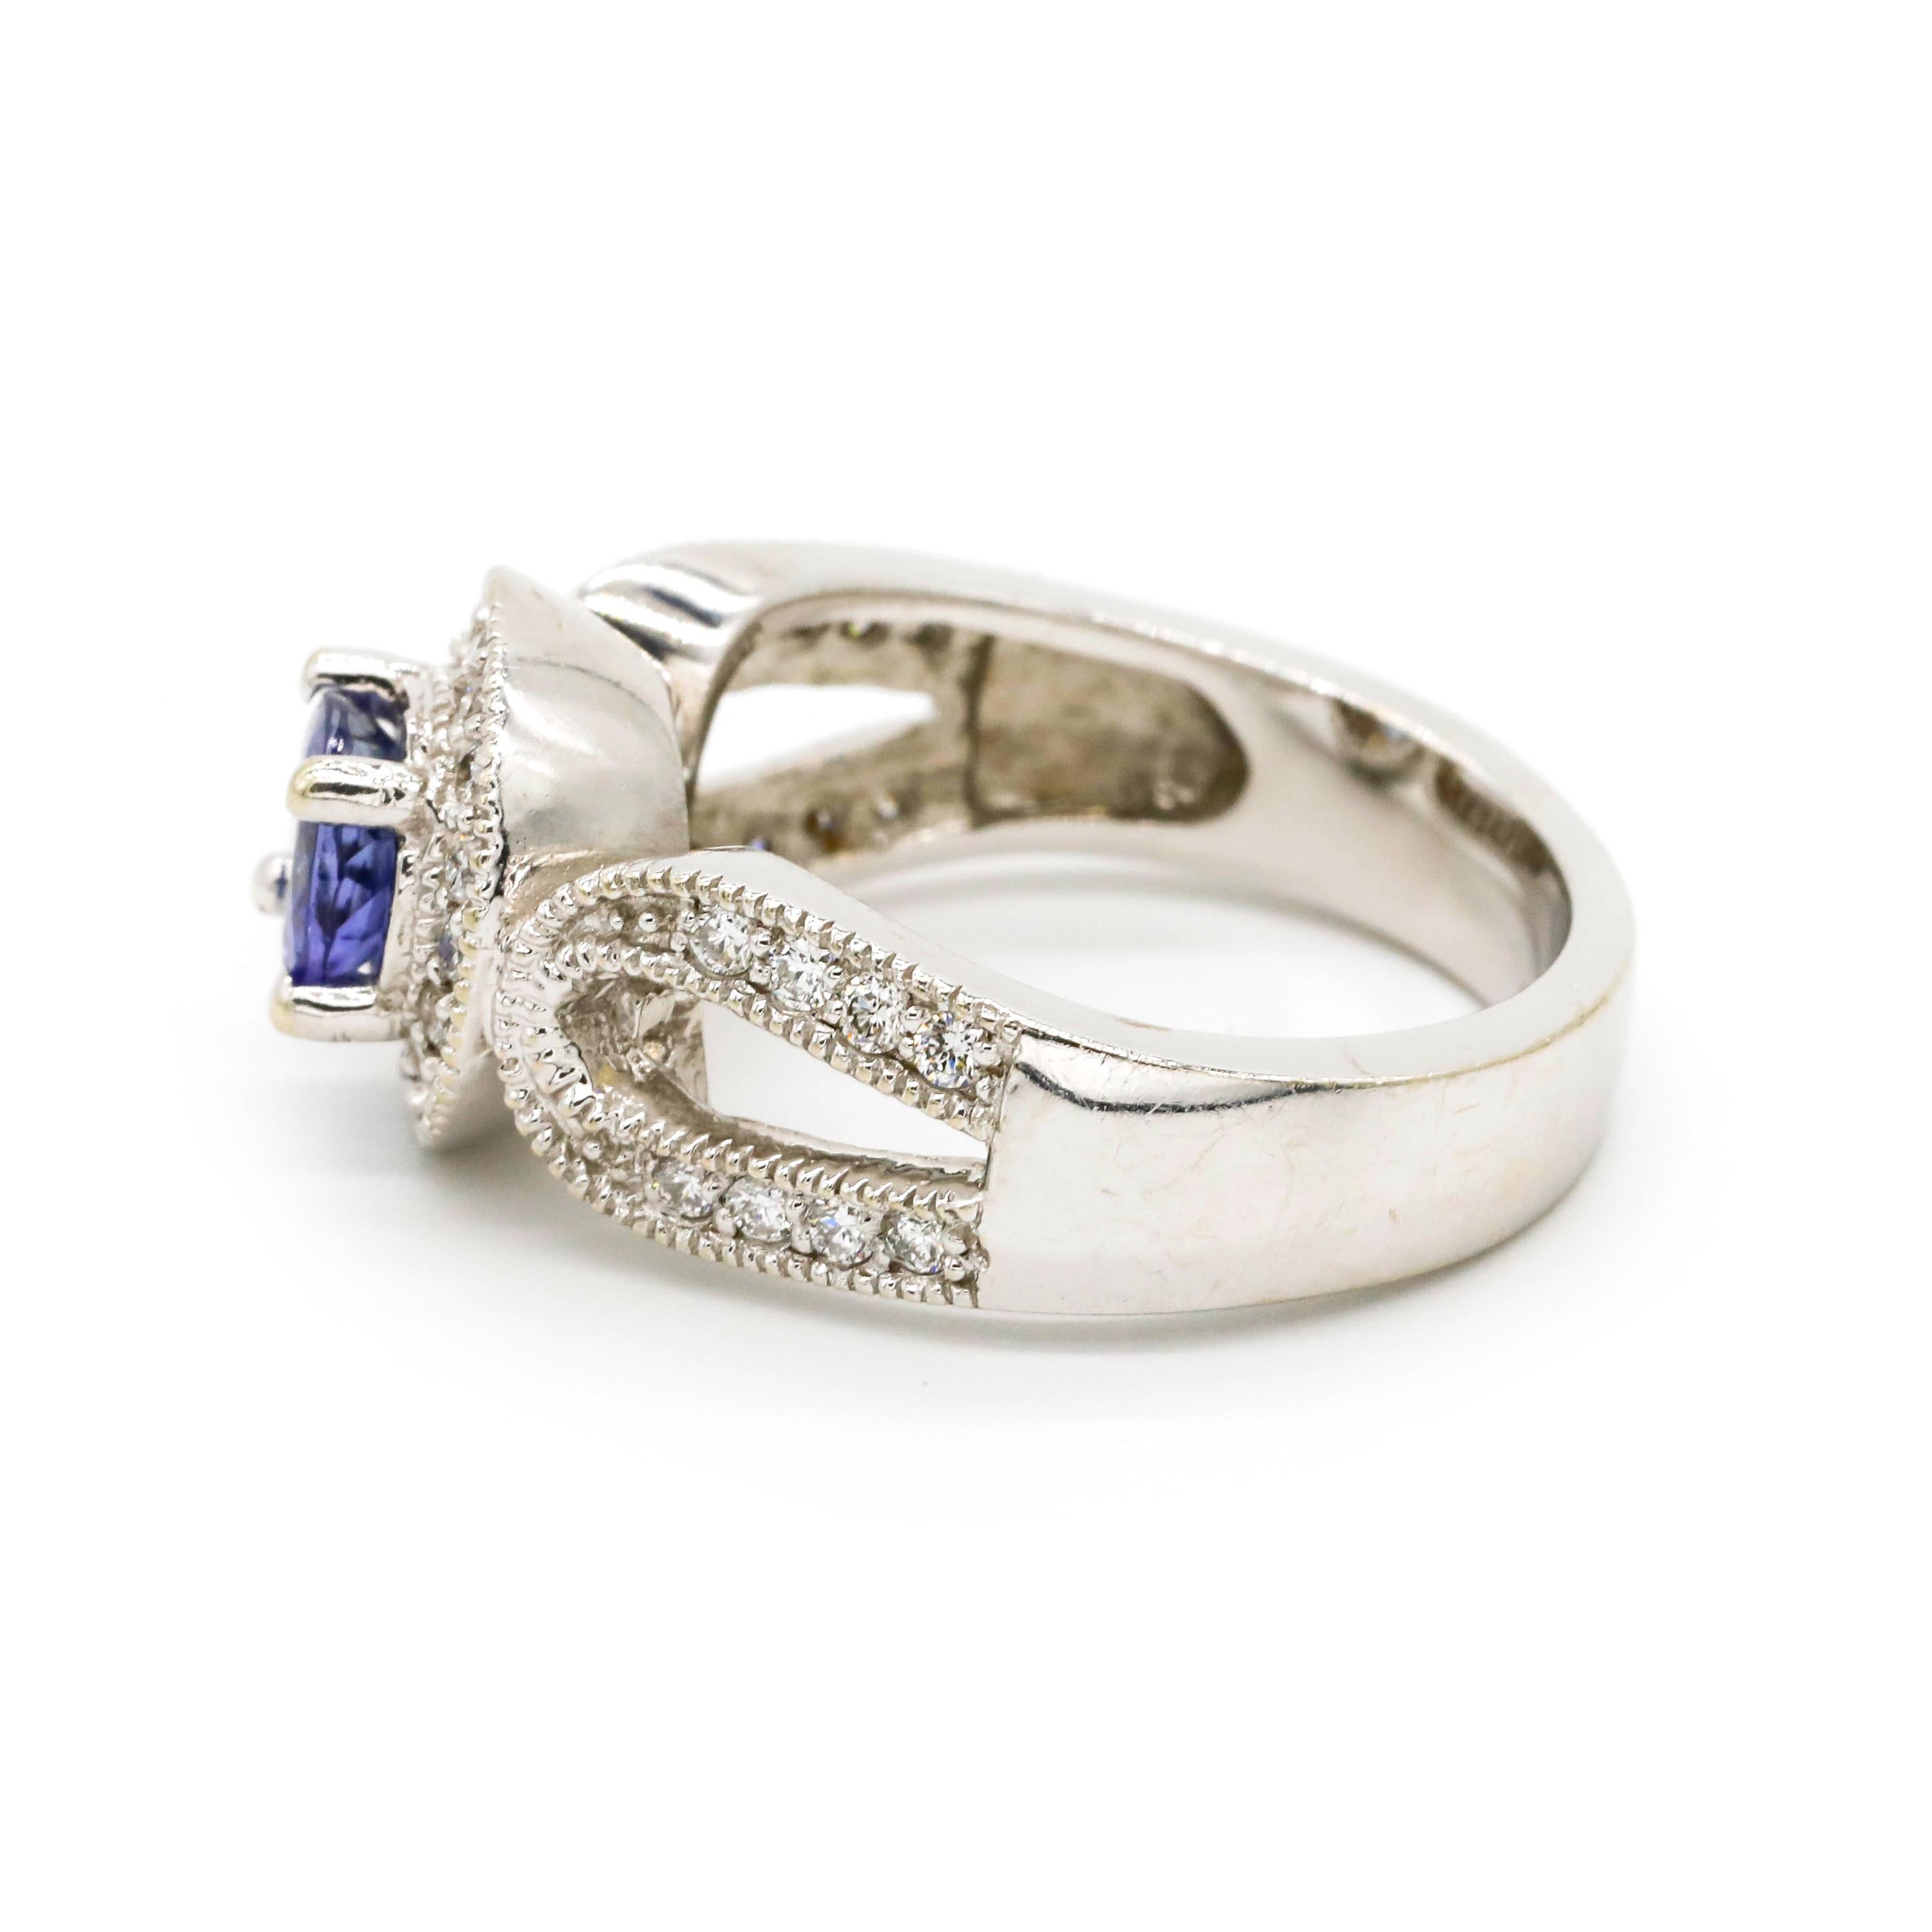 1.0 Carat Round Tanzanite 0.50 Carat Diamond 14 Karat White Gold Fine Halo Ring

Crafted in 14 kt White Gold, this Unique design showcases a Tanzanite 1.0 TCW round-shaped Tanzanite, set in a halo of round-cut mesmerizing diamonds, Polished to a